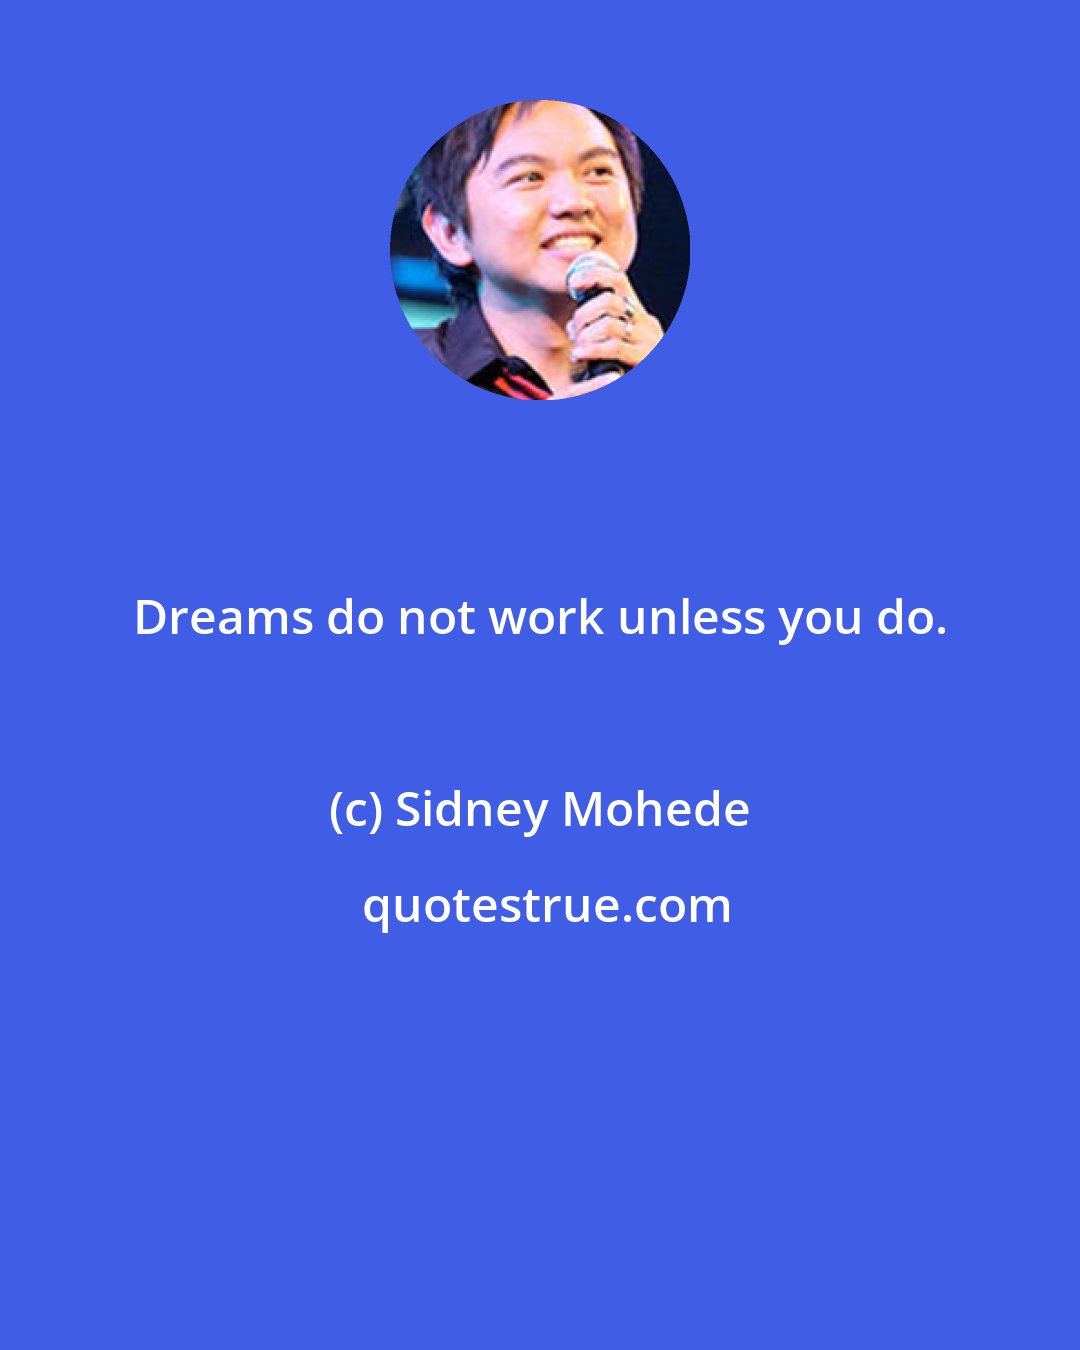 Sidney Mohede: Dreams do not work unless you do.